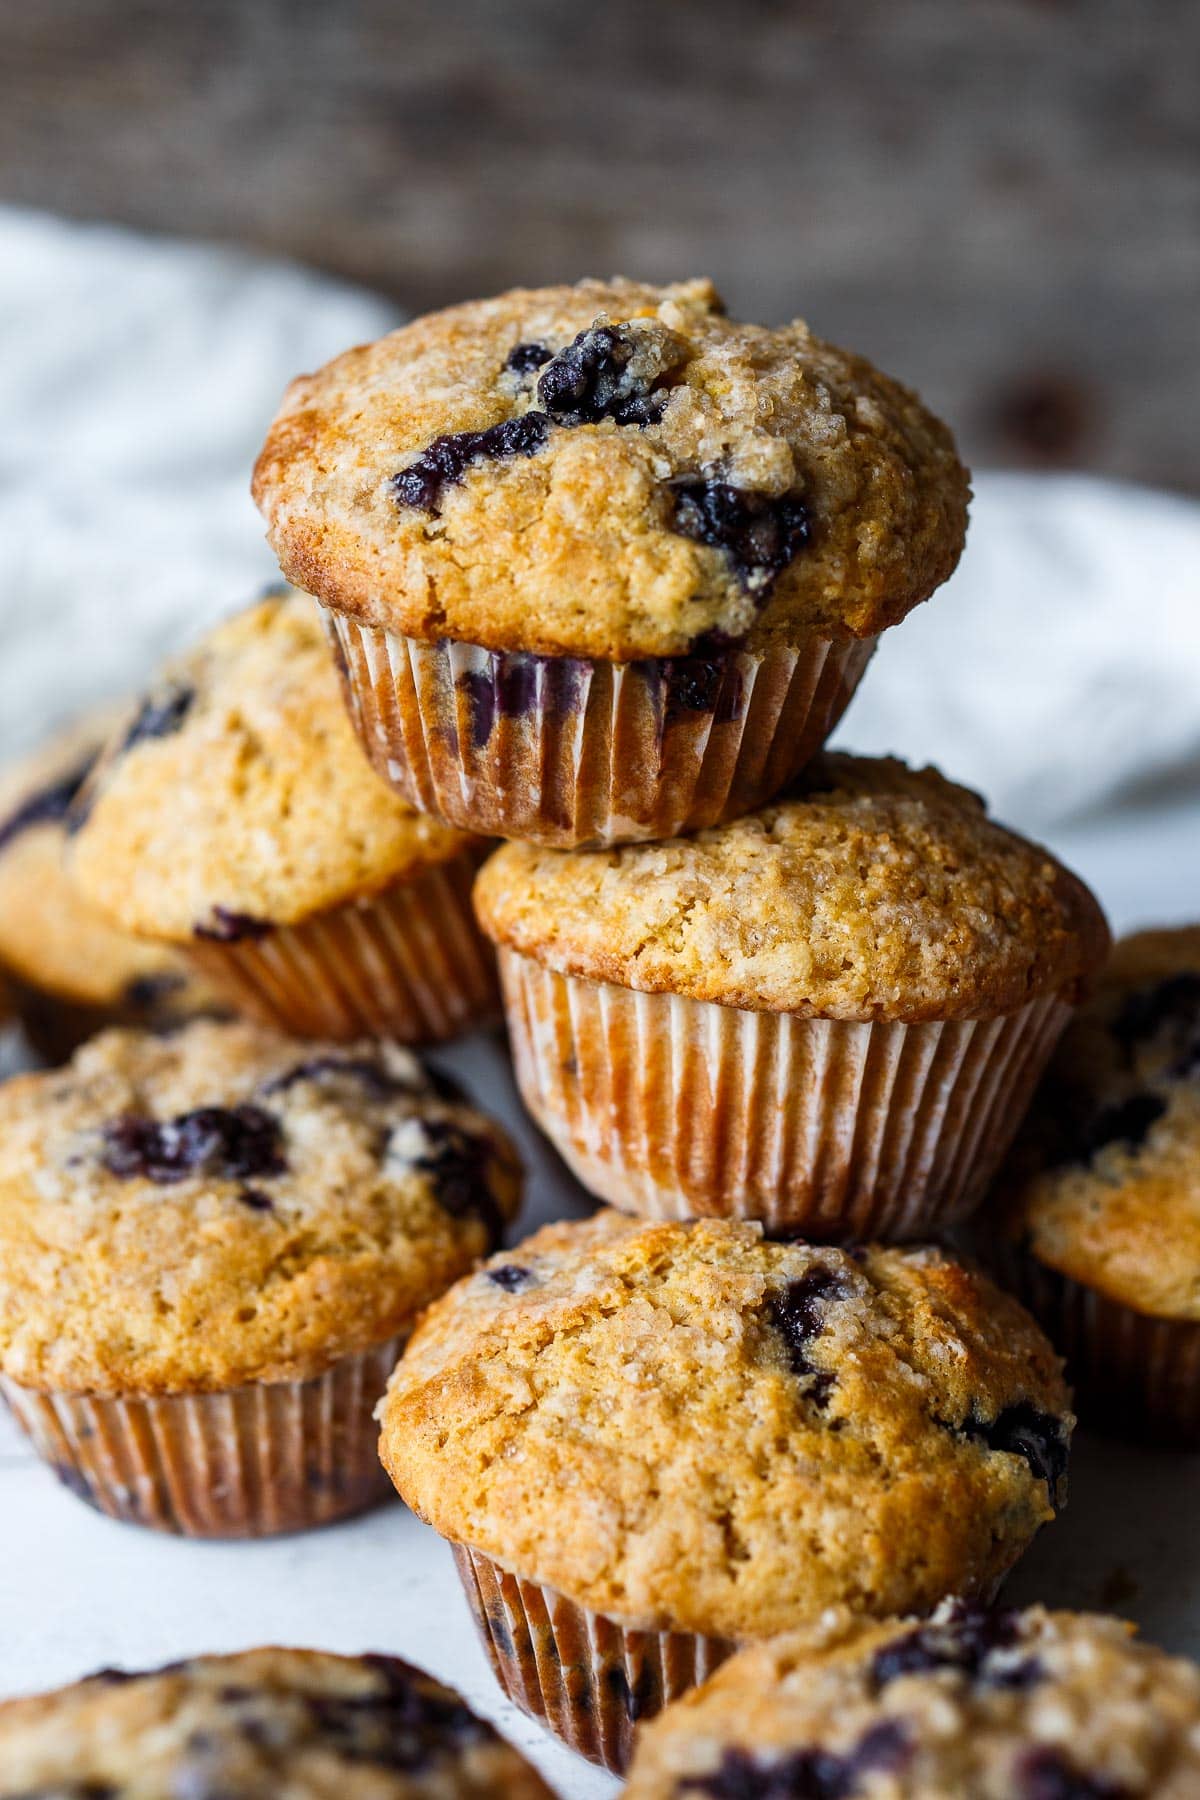 Tender Blueberry Muffins with lemon zest, vanilla and cardamom, lightly sweetened & can be made with fresh or frozen blueberries. Gluten-free adaptable. A delicious breakfast or afternoon snack. Gluten free adaptable.